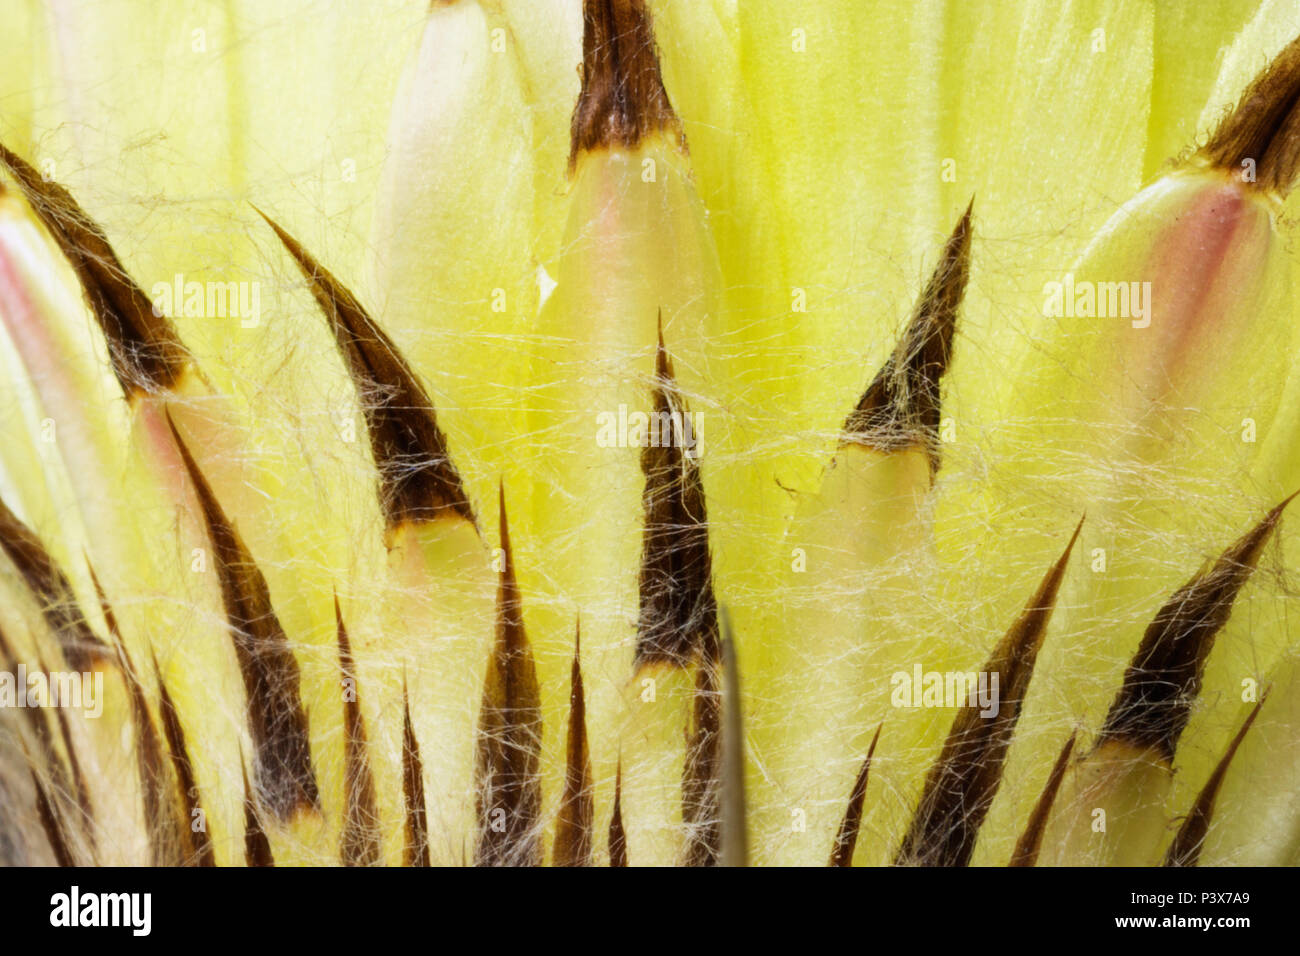 Cactus flower close-up,macrophotography ,yellow flower with brown end ,abstract effect ,studio photo with backlight Stock Photo